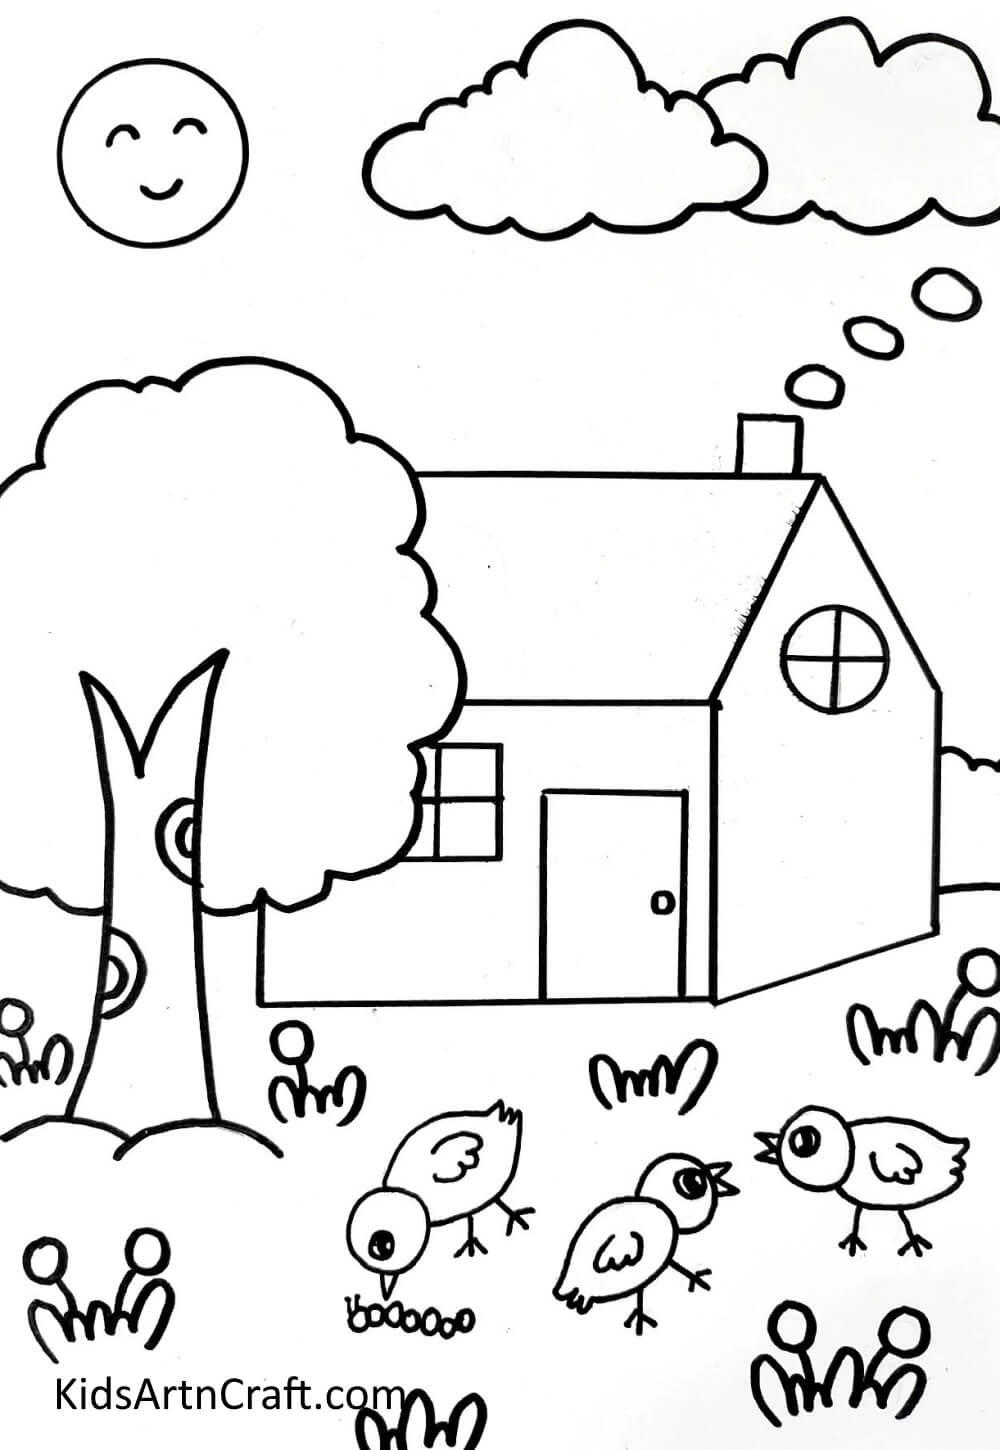 Drawing Sun And Clouds Learn how to draw a house, tree, and scenery step by step